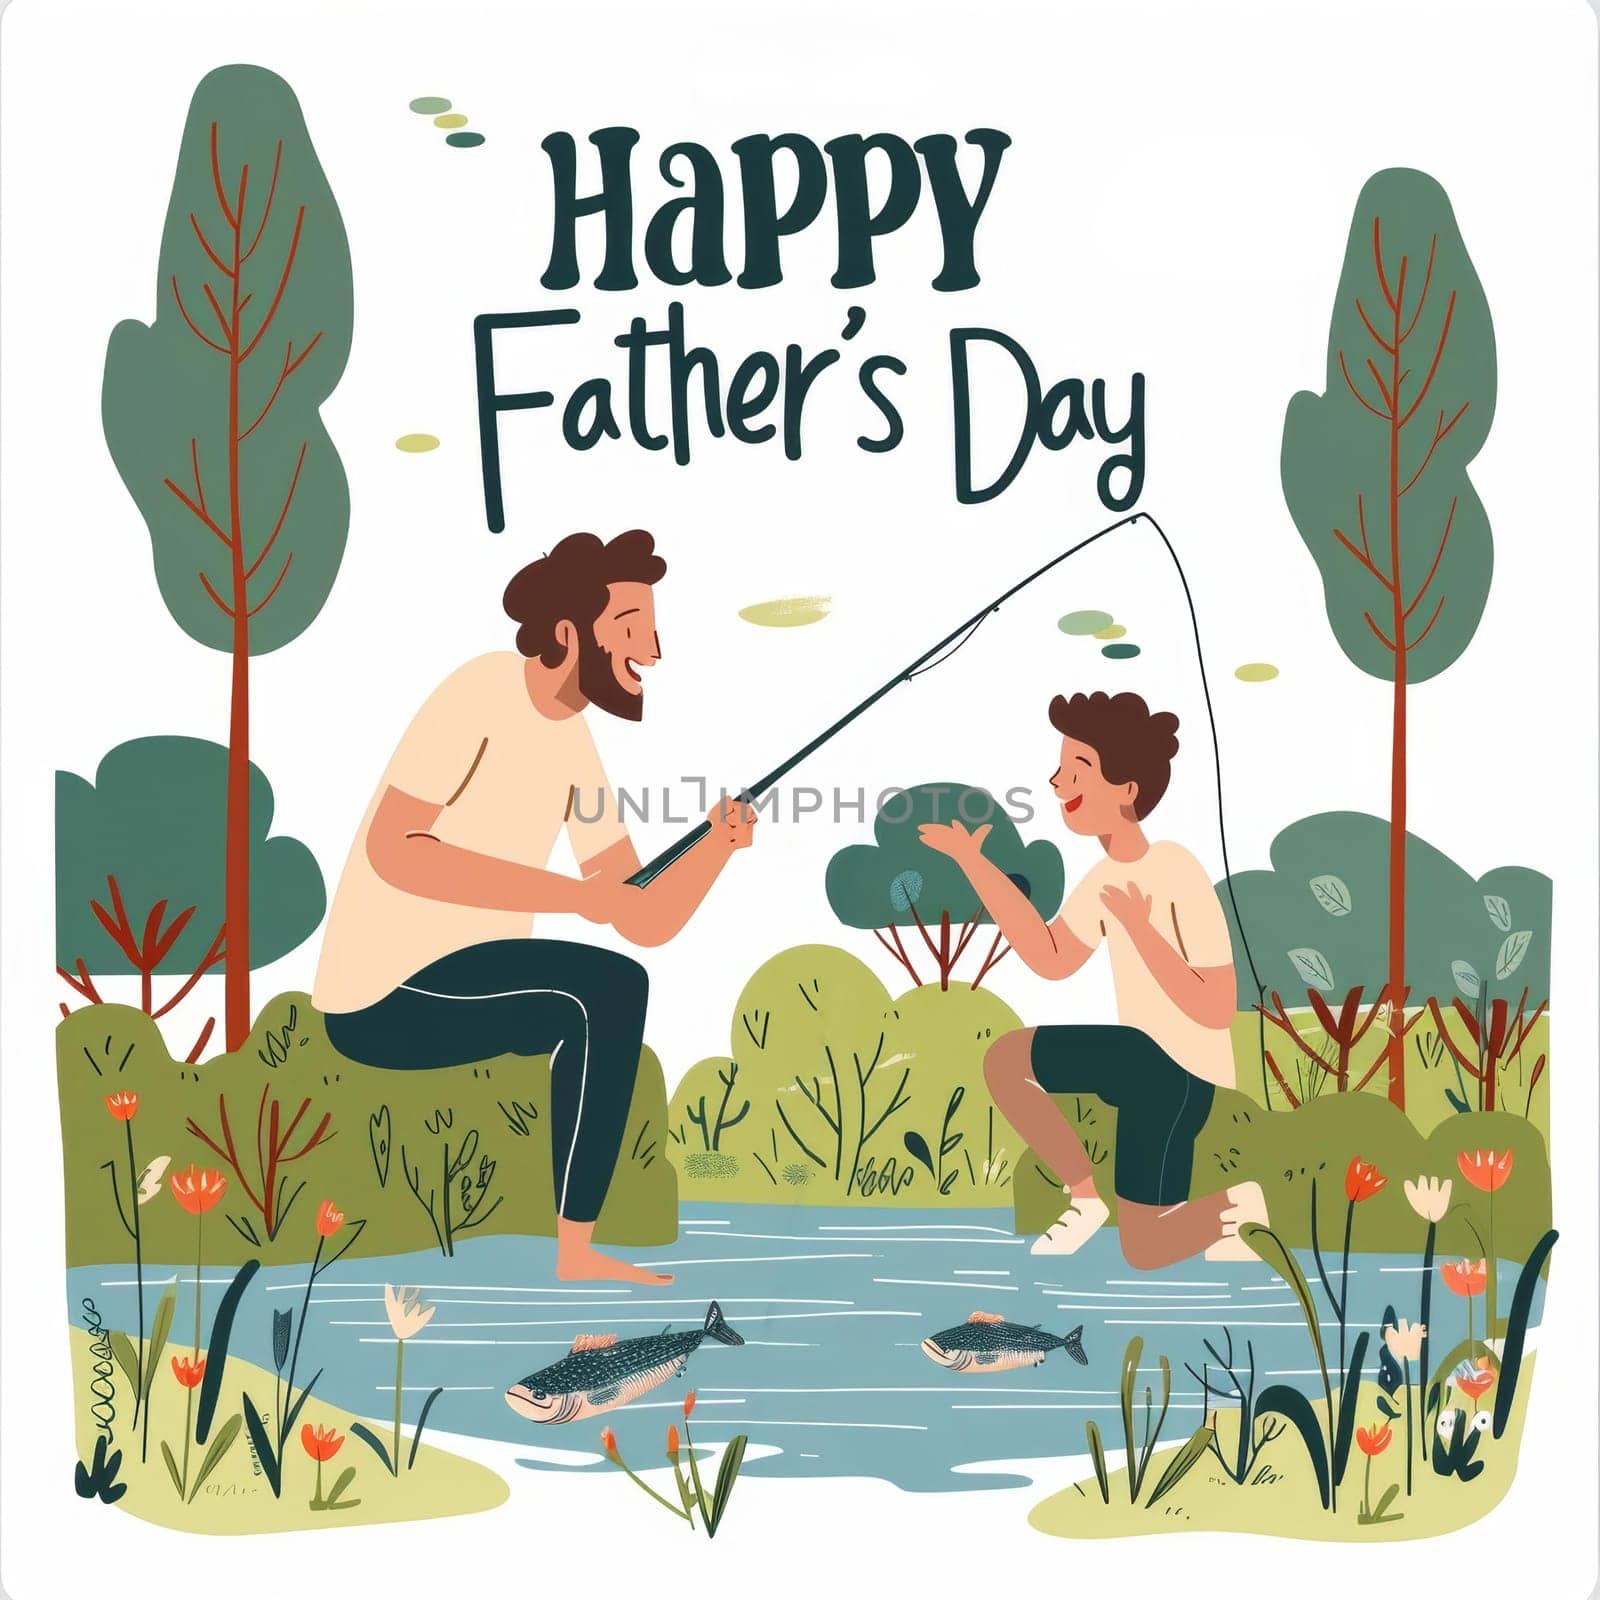 A heartwarming illustration of a father teaching his young son to fish in a lush pond, highlighted by a Happy Fathers Day message above